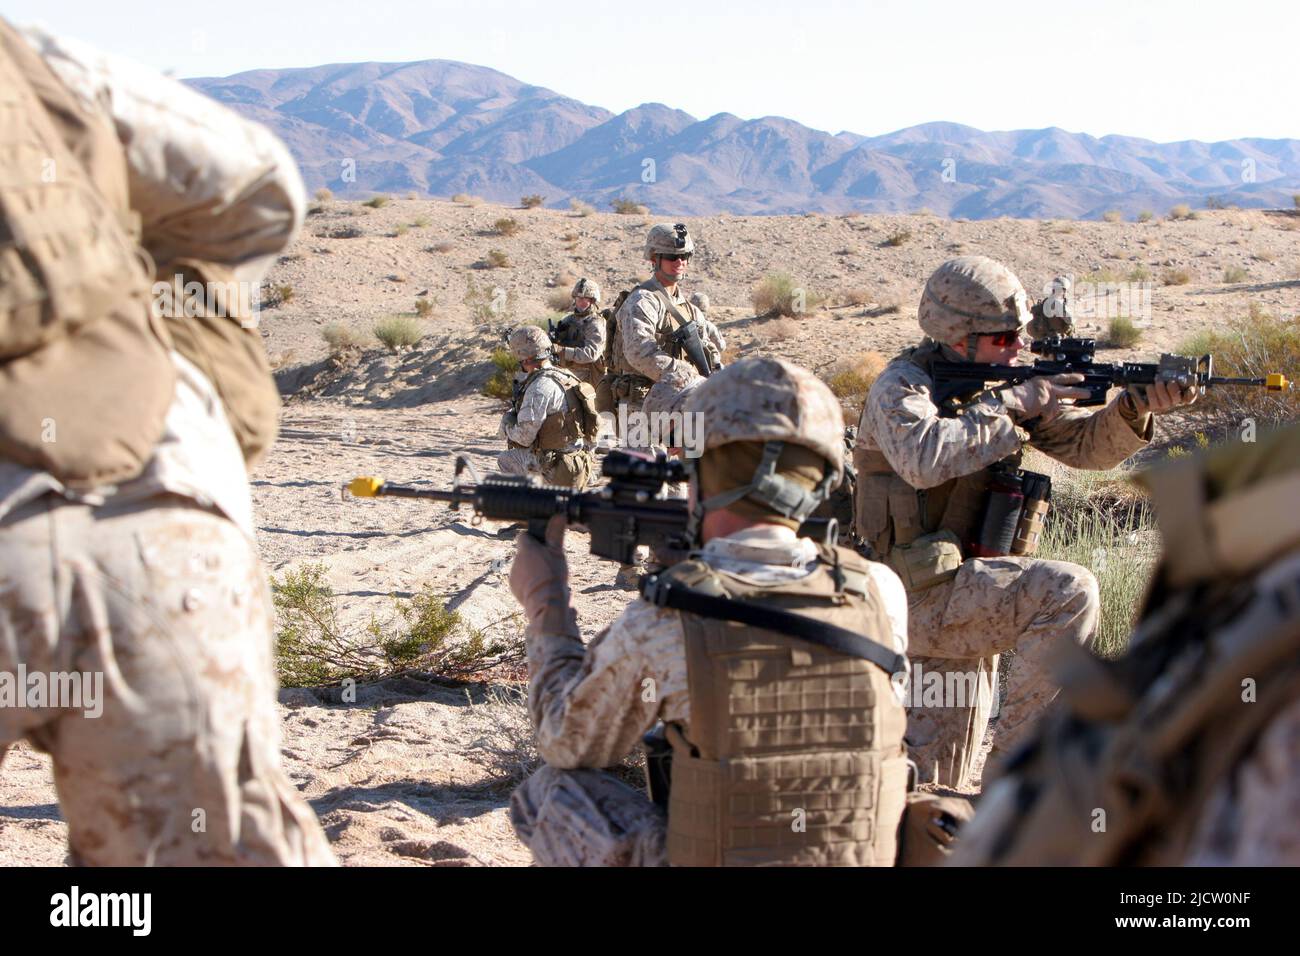 U.S. Marines with 1st Battalion, 8th Marine Regiment (1/8), 2D Marine Division, are providing security for their patrol during an Improvised Explosive Stock Photo